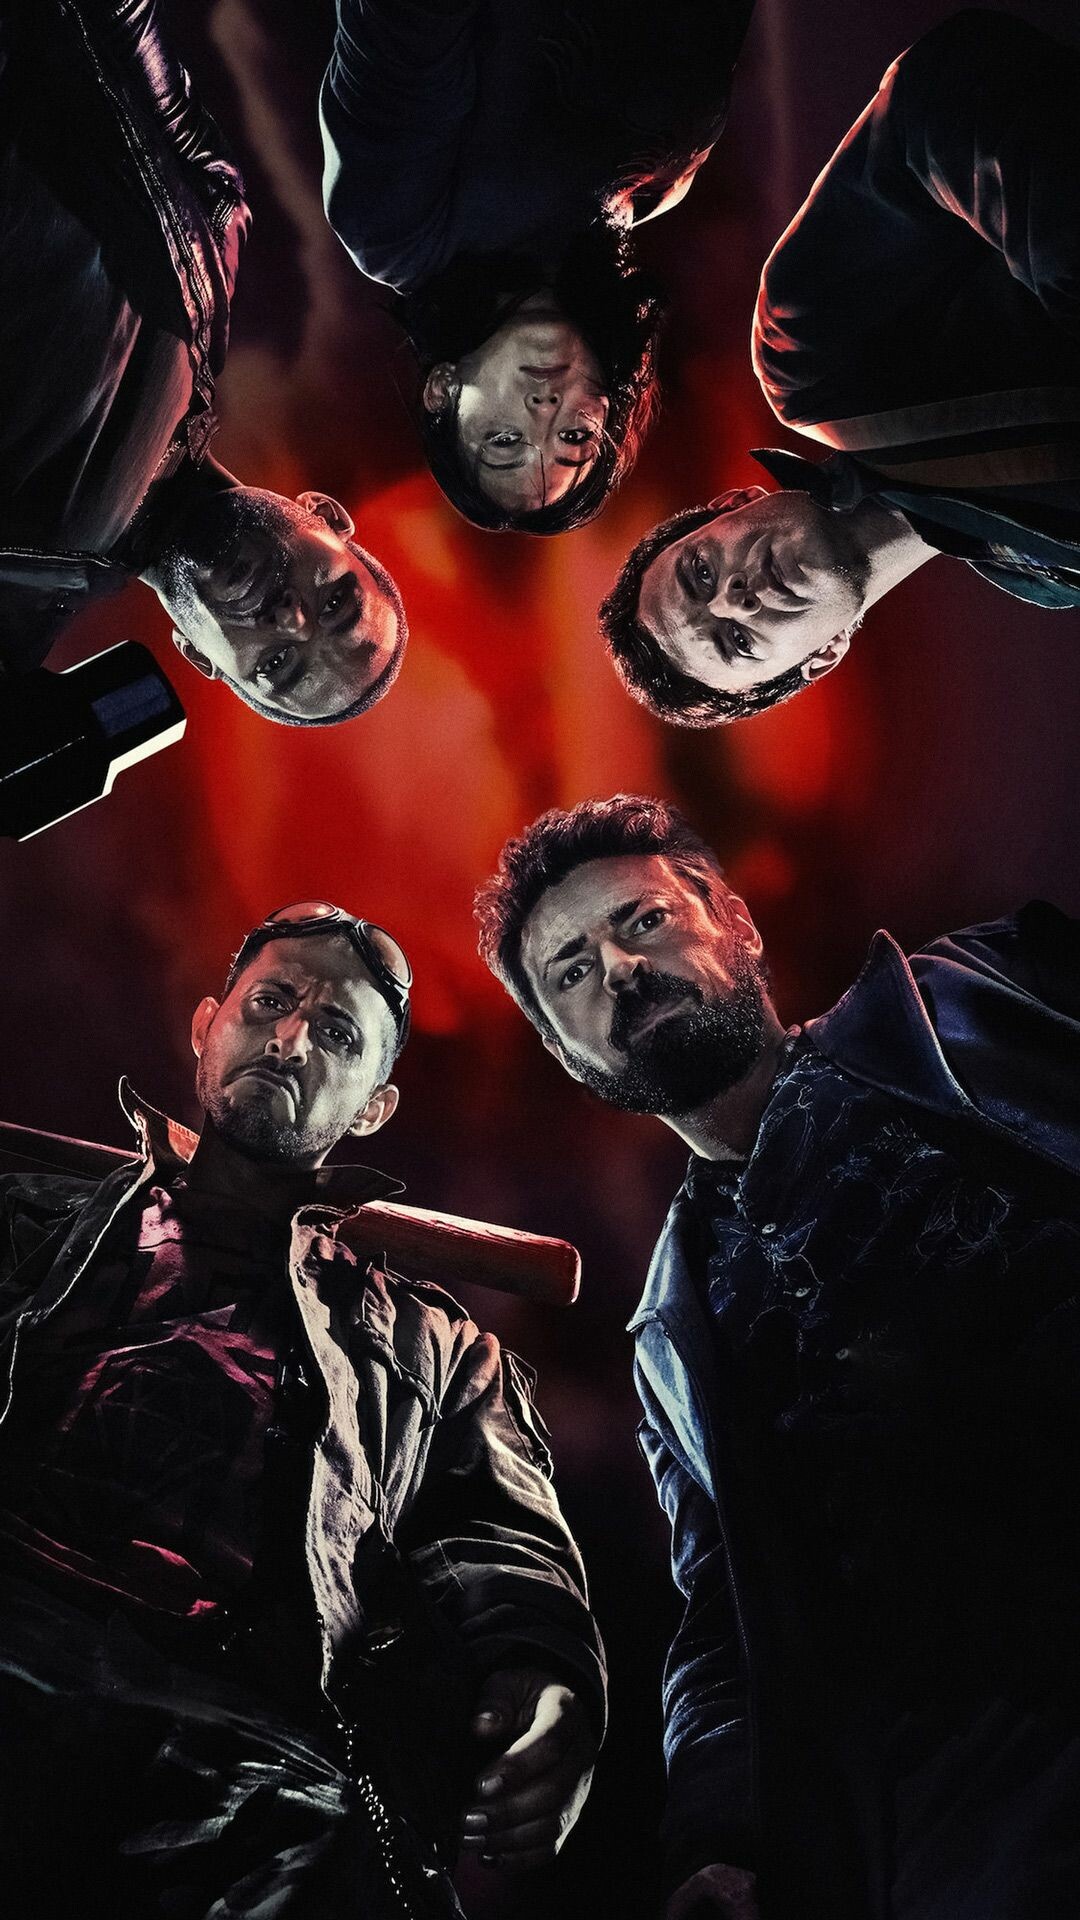 The Boys: The eponymous team of vigilantes combating superpowered individuals who abuse their abilities. 1080x1920 Full HD Wallpaper.